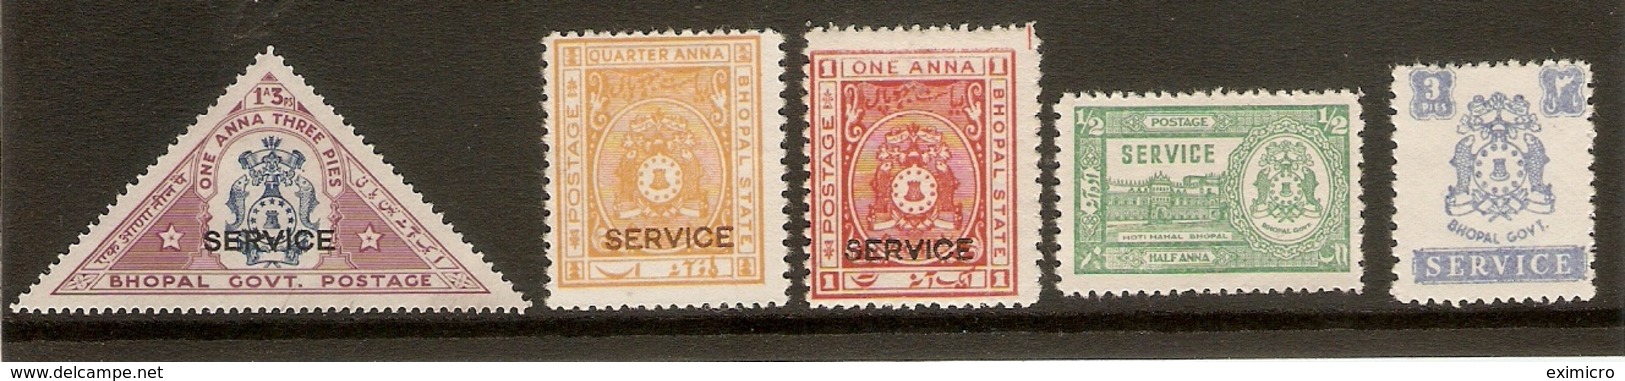 INDIA - BHOPAL 1935 - 1949 OFFICIALS INCLUDING 1938 ¼a YELLOW SG O334 MOUNTED MINT Cat £20 - Bhopal